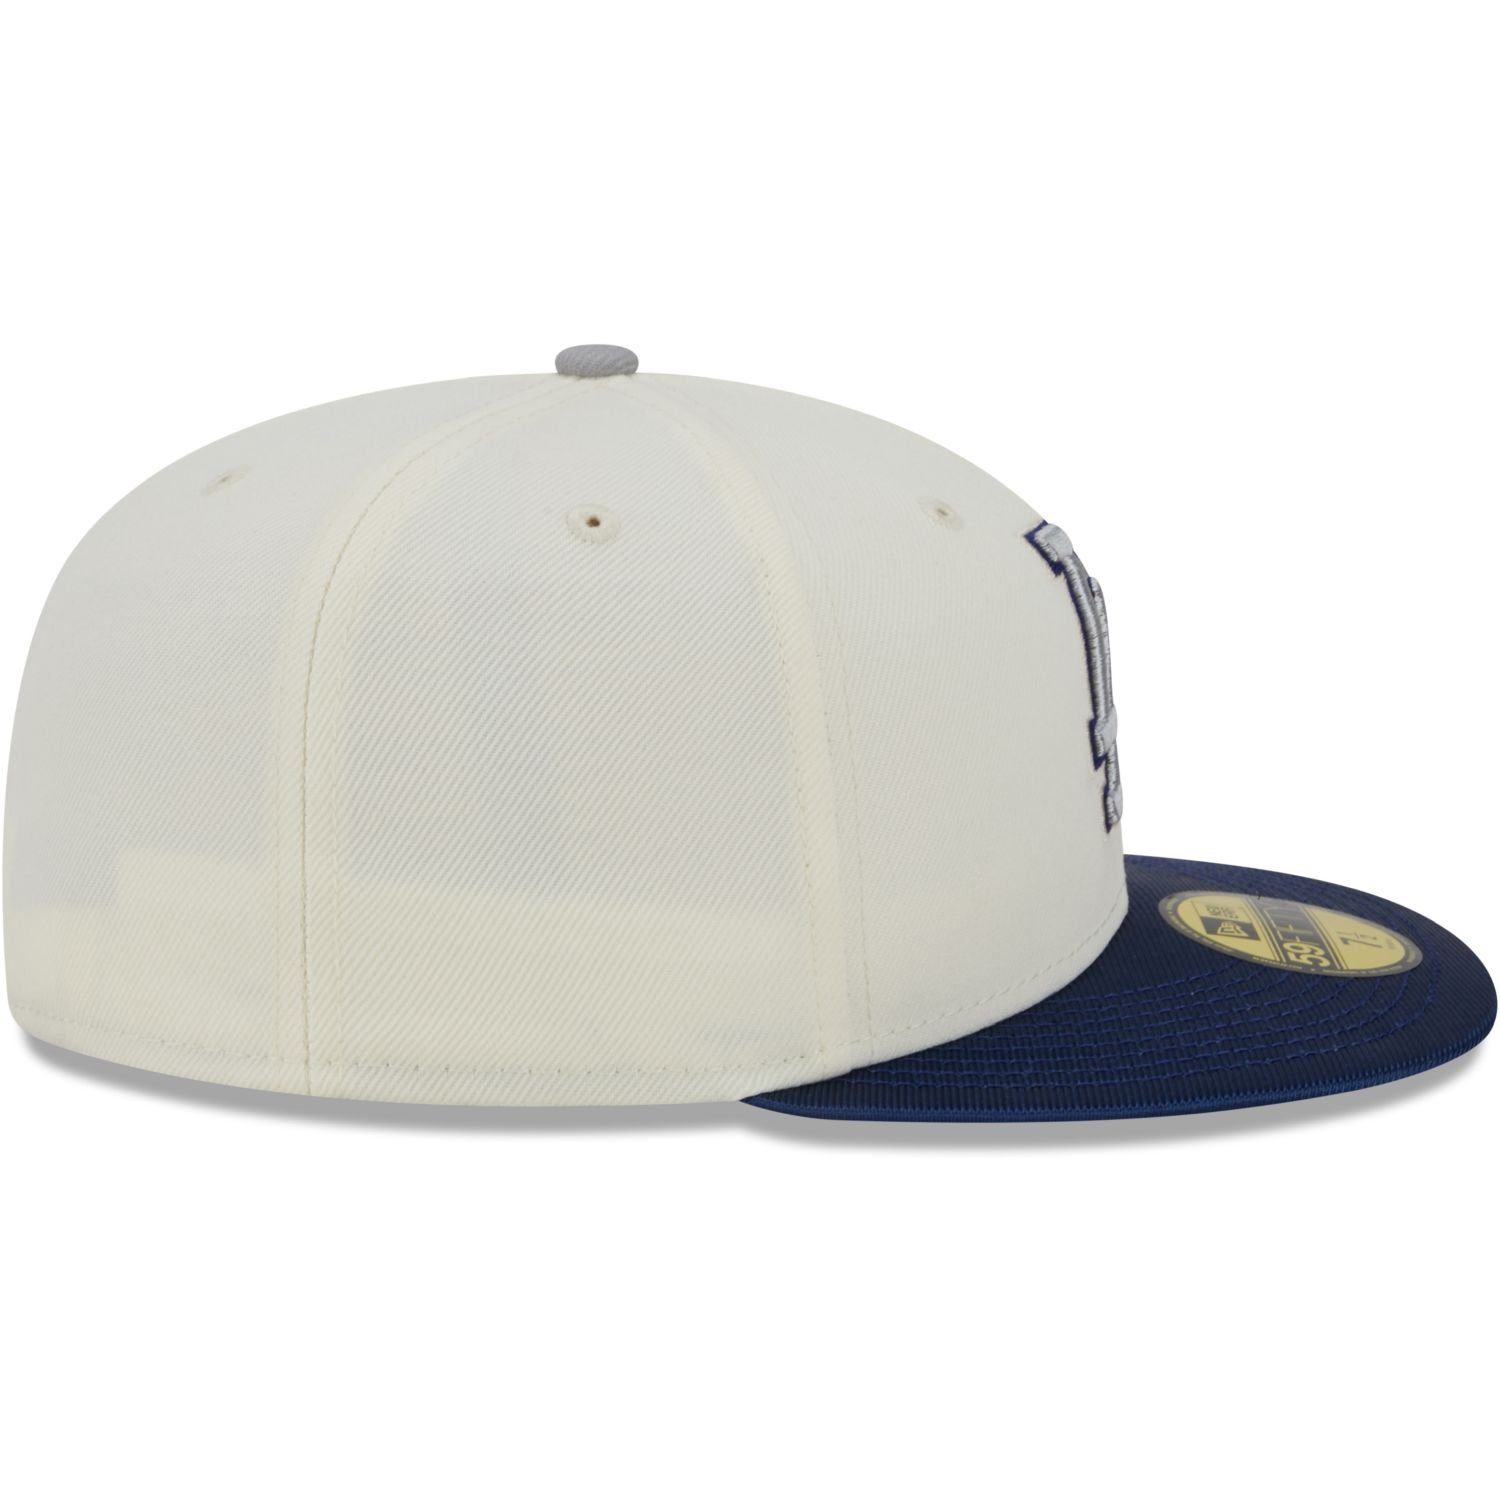 New Era Fitted 59Fifty SHIMMER Angeles Los Cap Dodgers